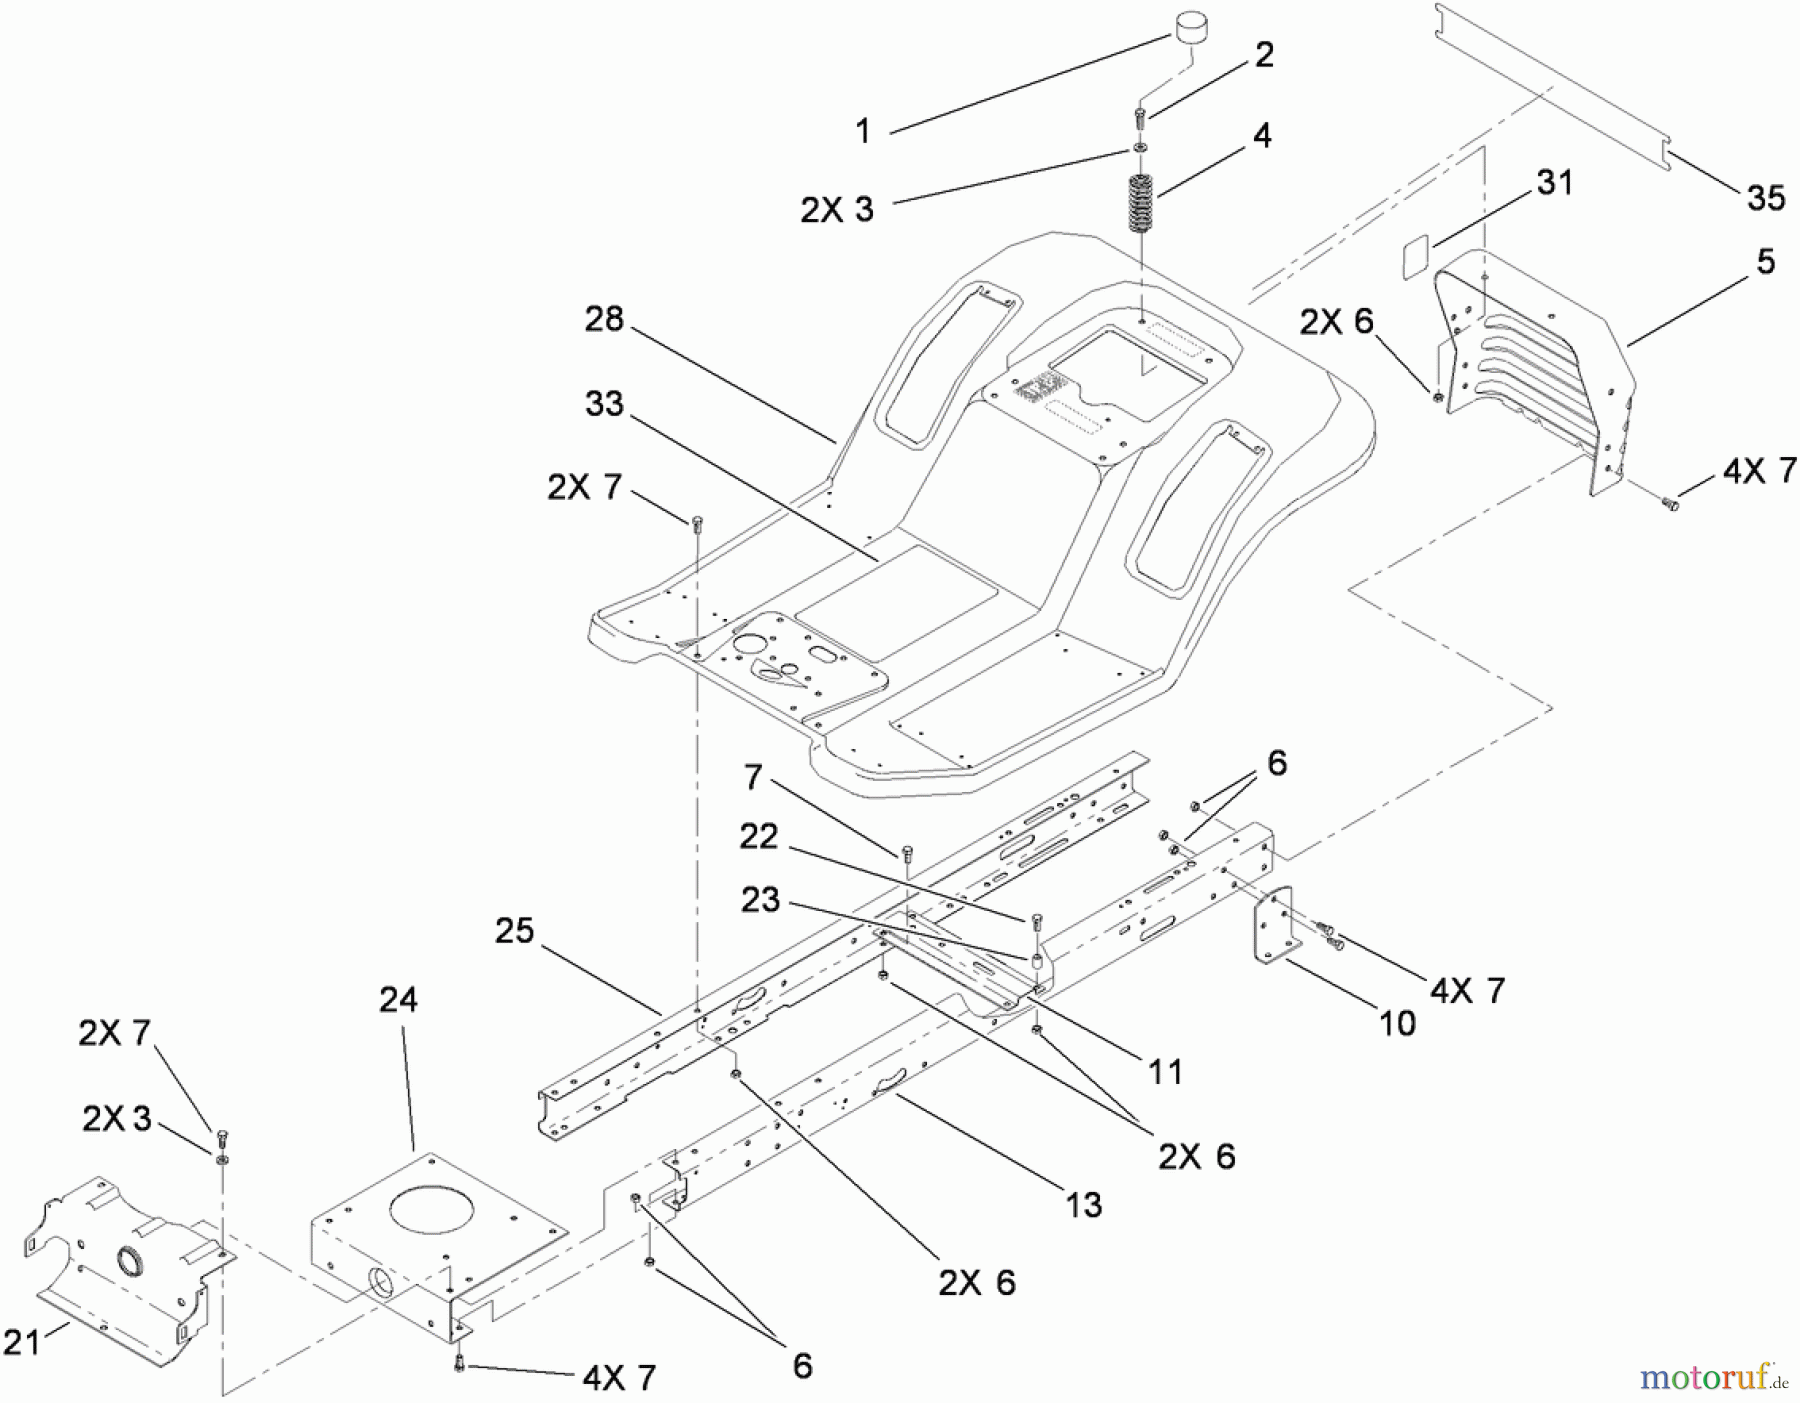  Toro Neu Mowers, Lawn & Garden Tractor Seite 1 71252 (XL 380H) - Toro XL 380H Lawn Tractor, 2010 (310000001-310002000) FRAME AND BODY ASSEMBLY